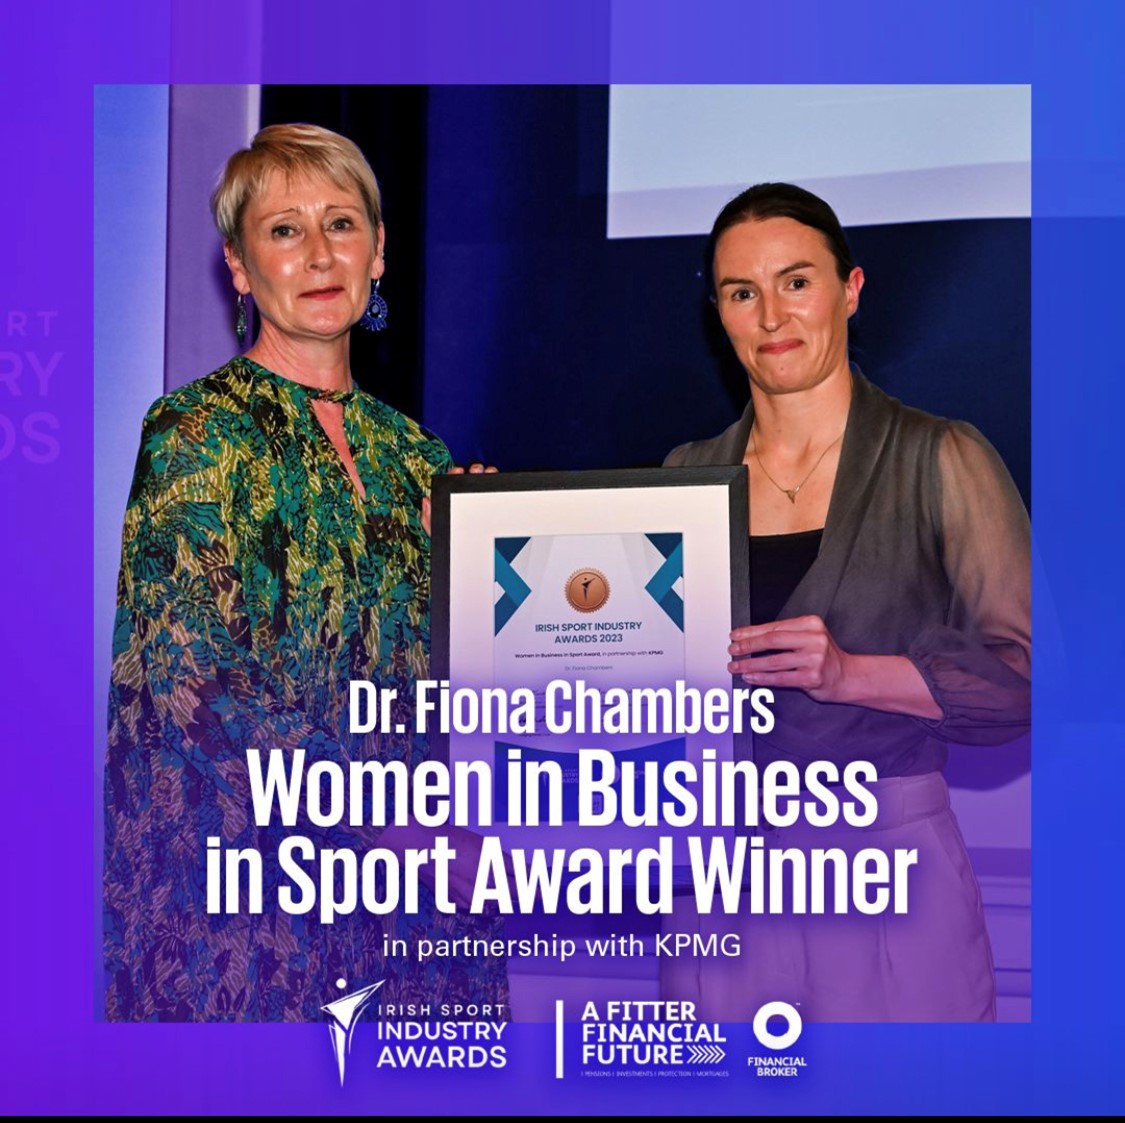 Federation of Irish Sport 'Irish Sport Industry Awards 2023' - Inaugural Women in Business in Sport Award goes to Dr Fiona Chambers